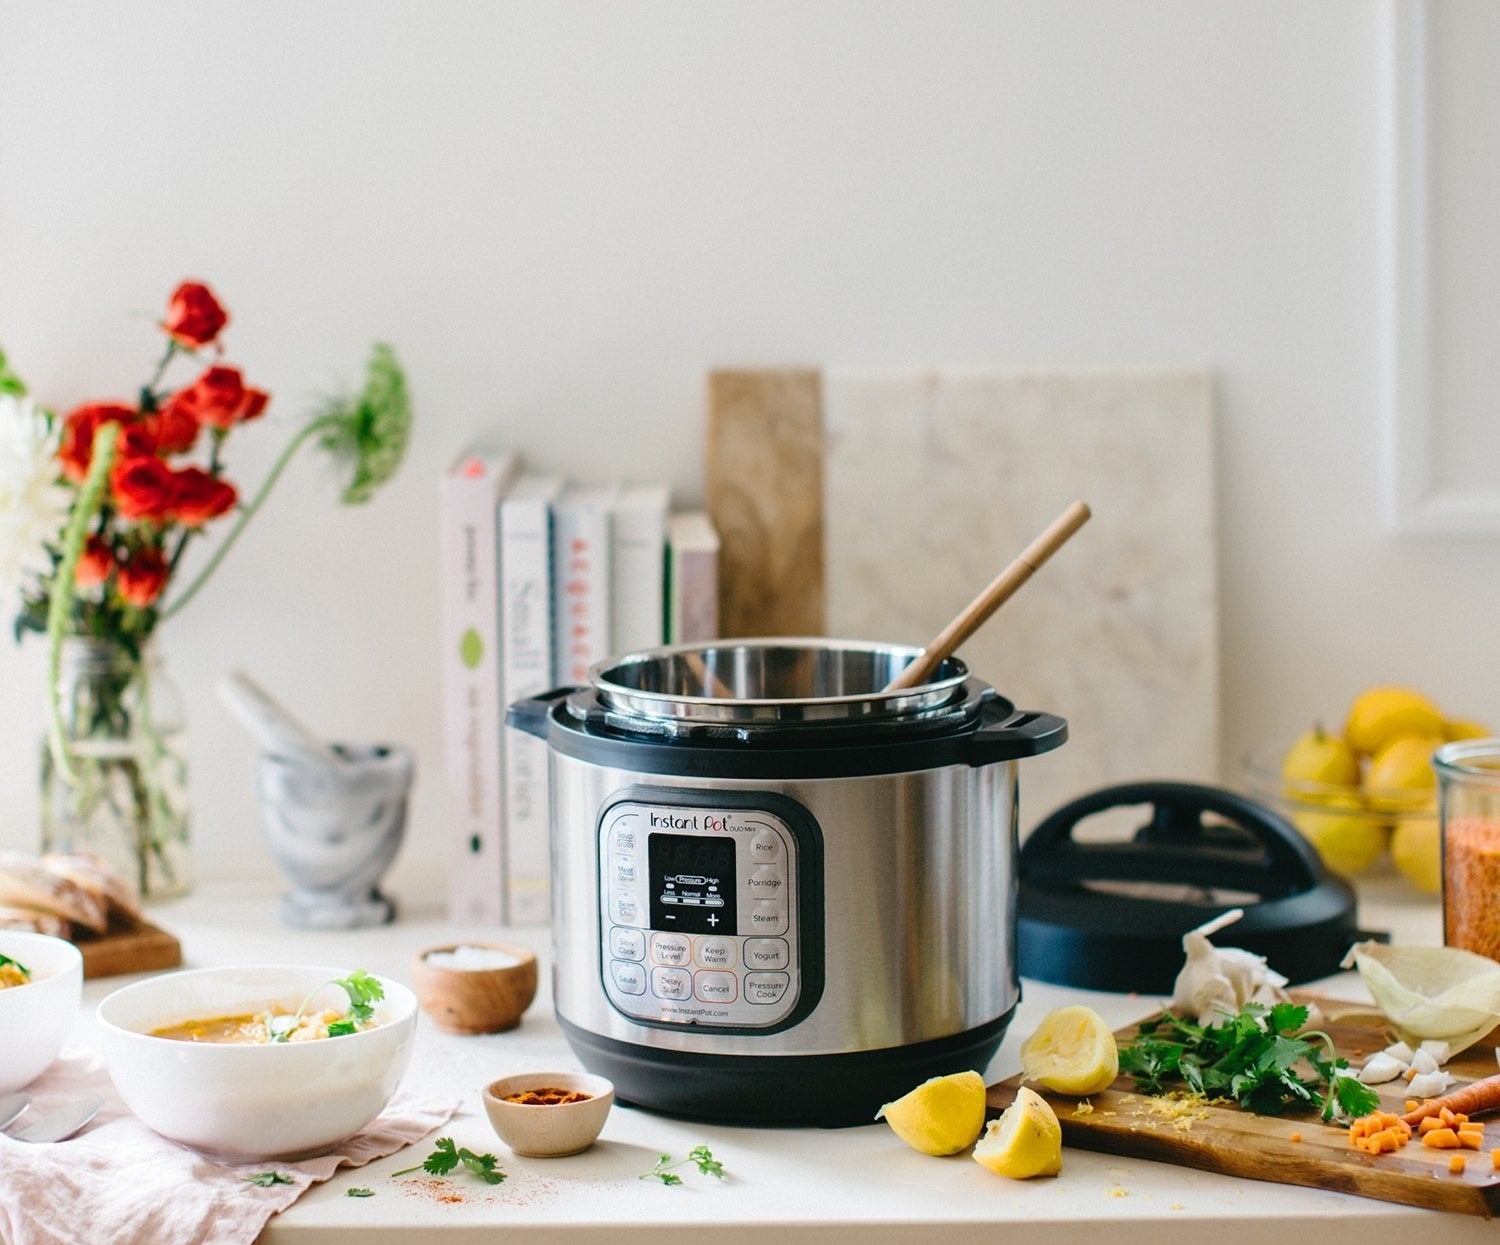 The Insta Pot with silver outside and black base and handles with an interface on the front